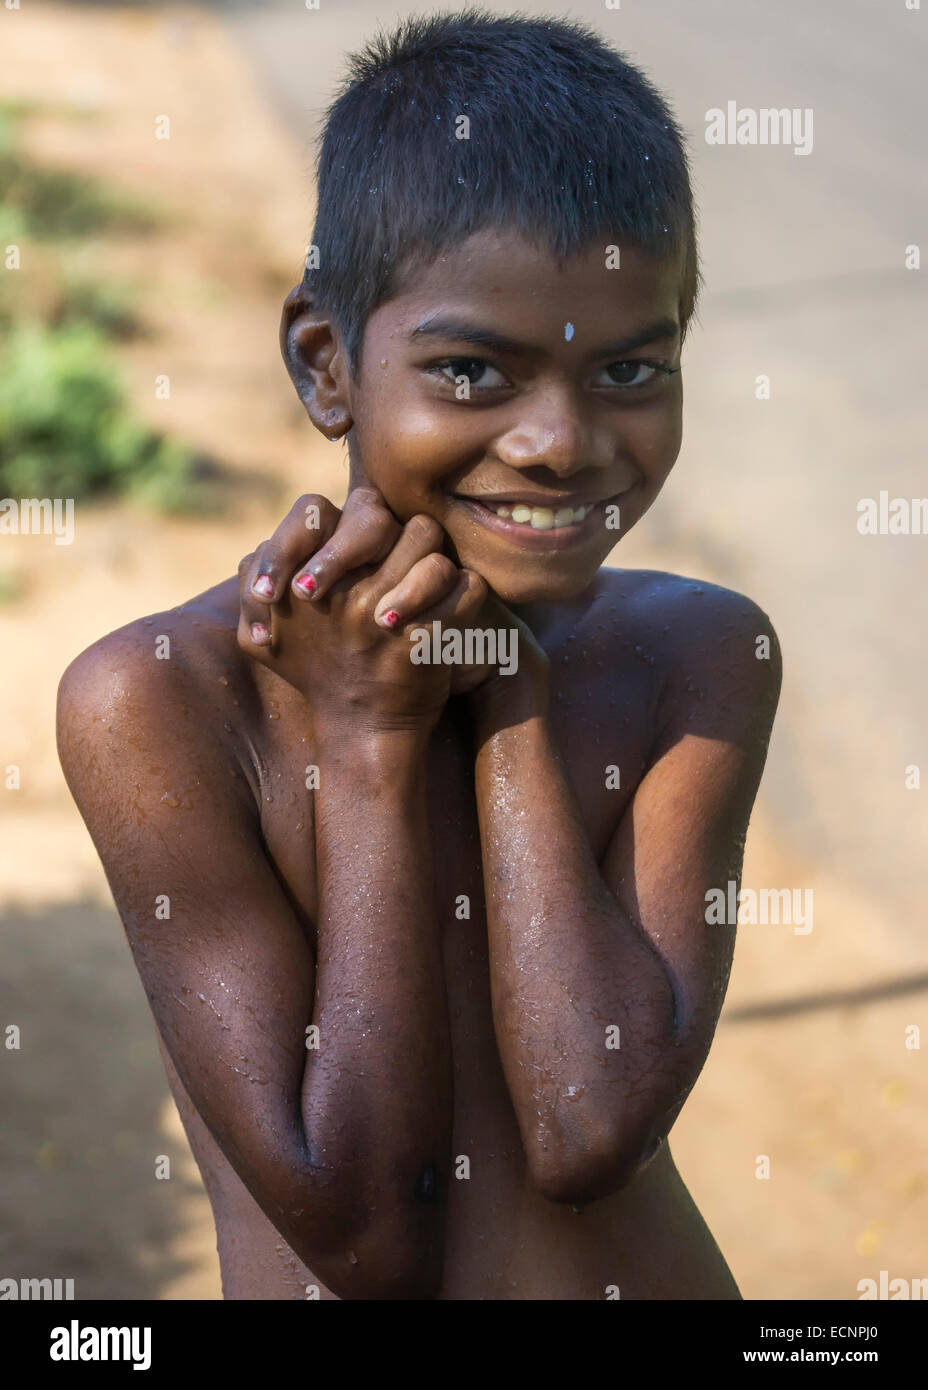 Young smiling boy with red nails. Stock Photo